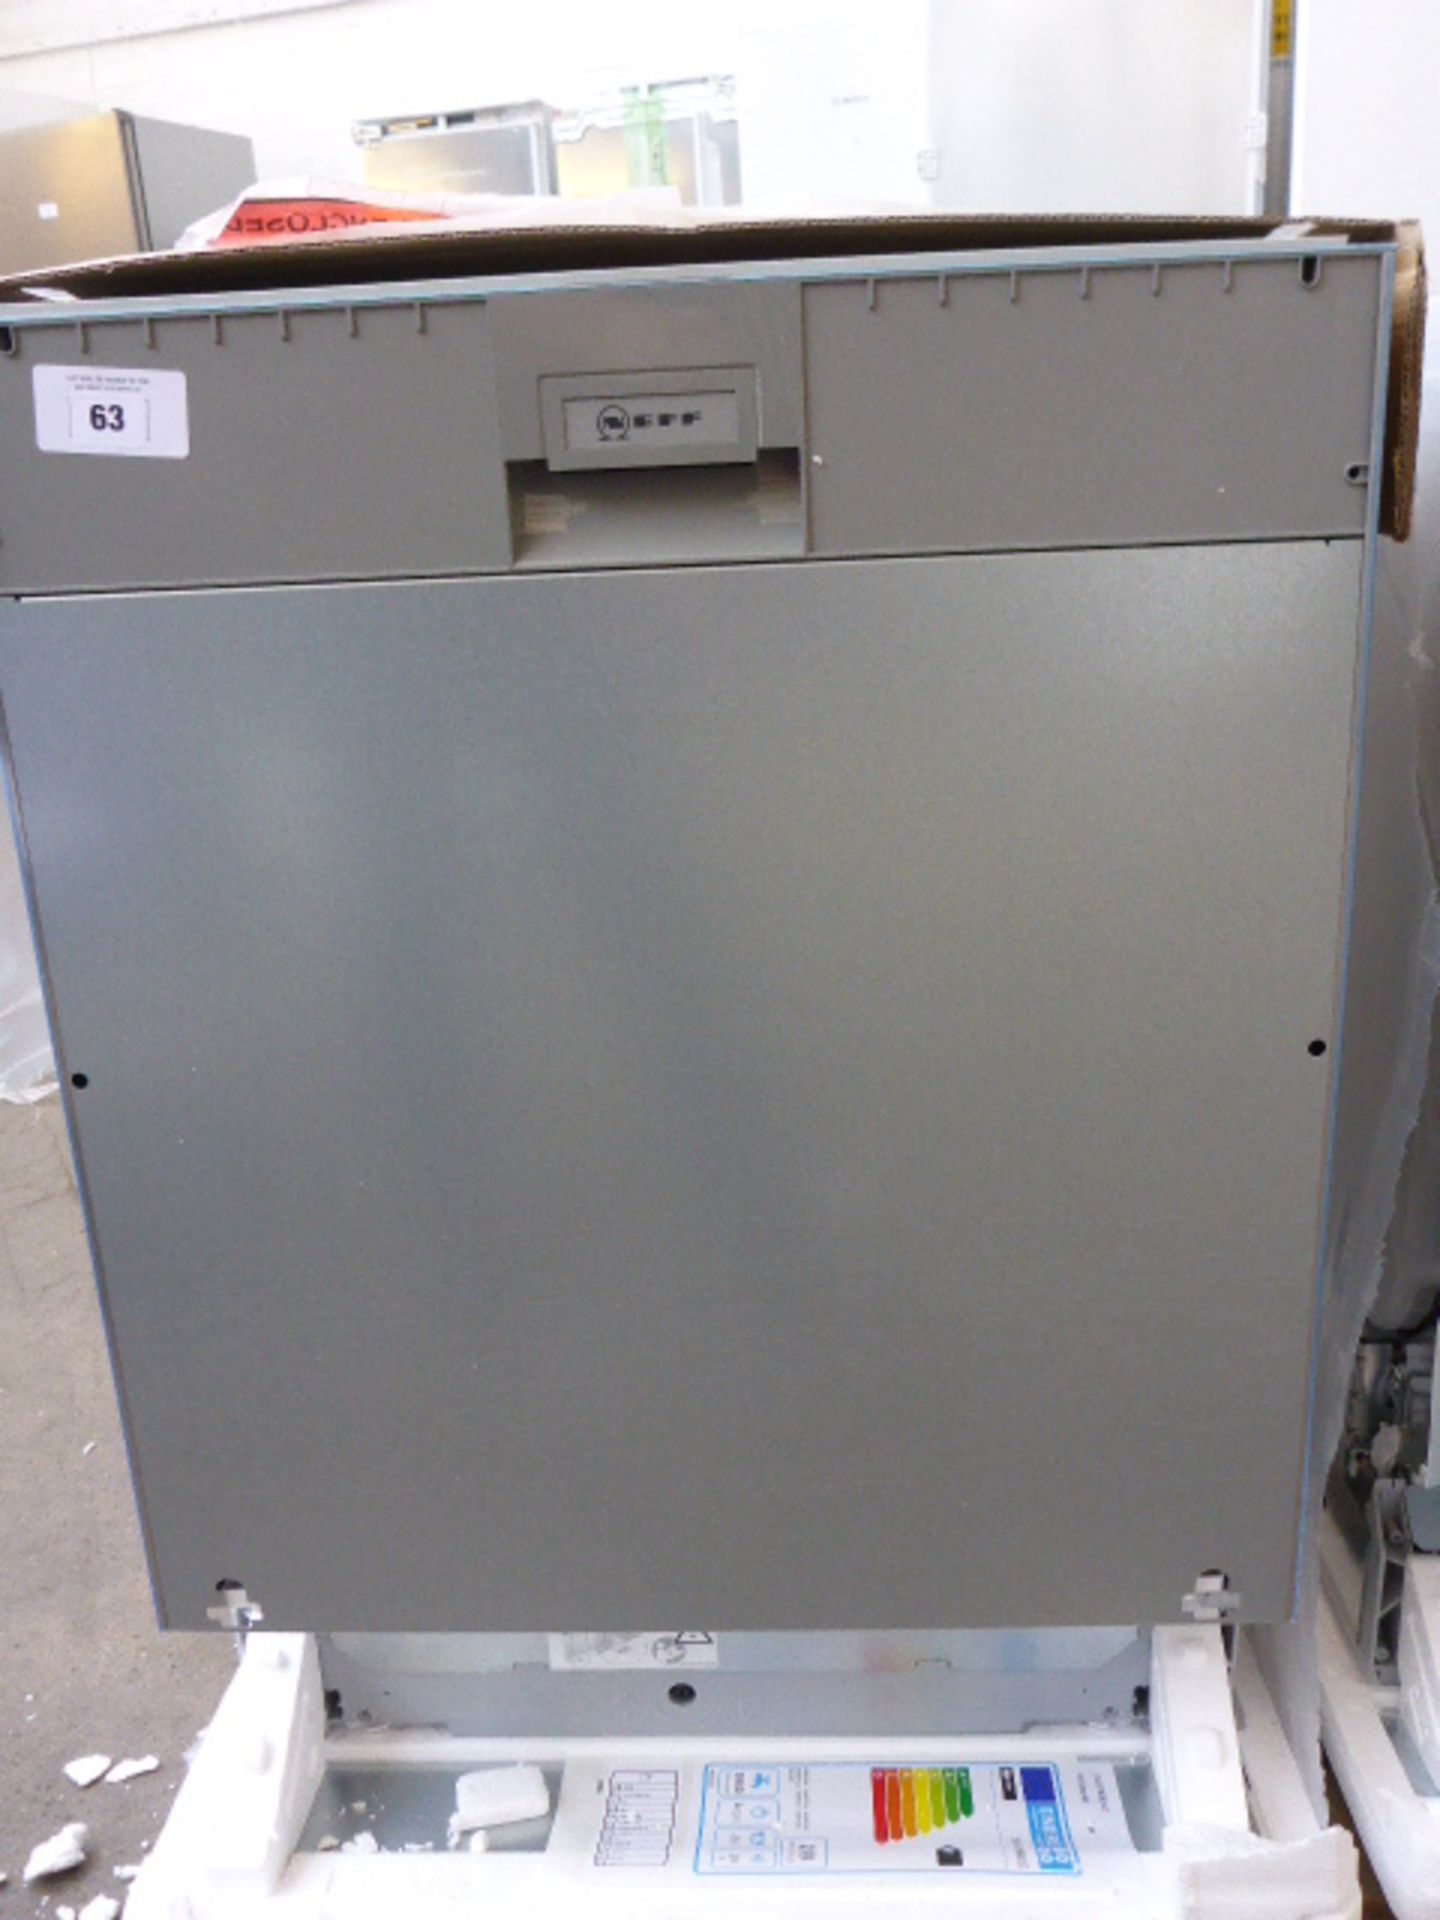 S515T80D1GB Neff Dishwasher fully integrated